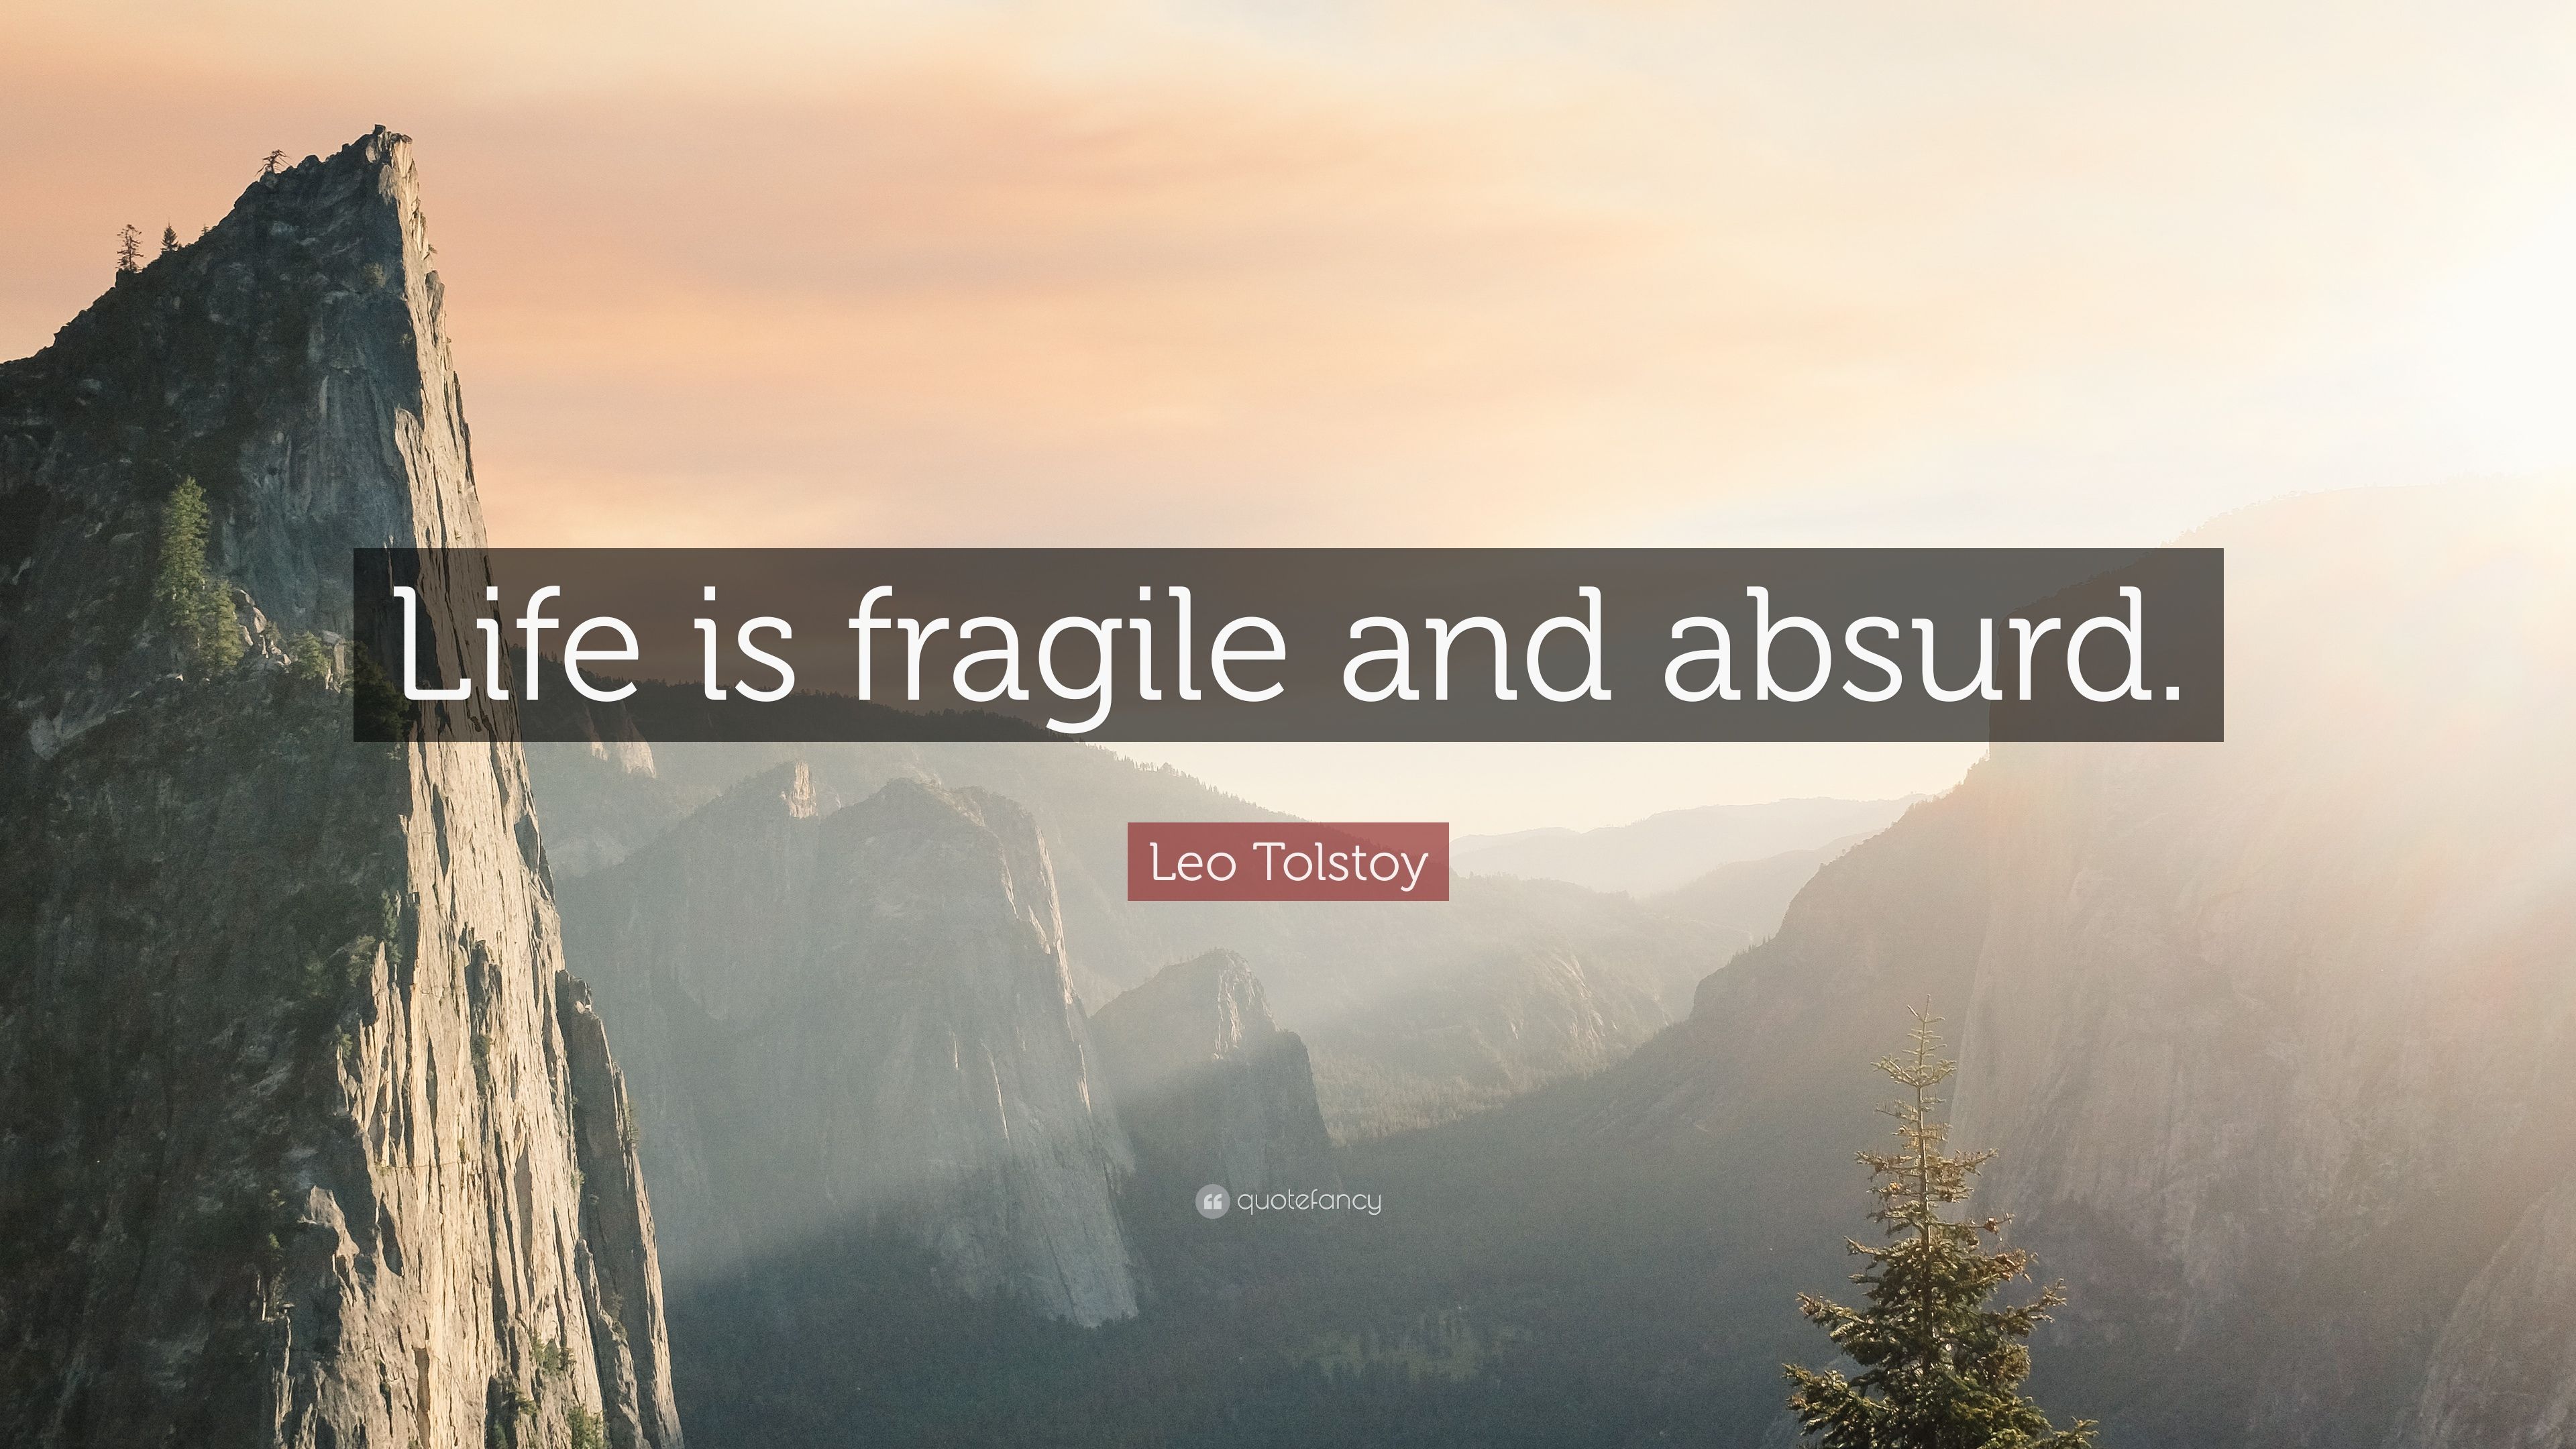 Leo Tolstoy Quote: “Life is fragile and absurd.” 12 wallpaper